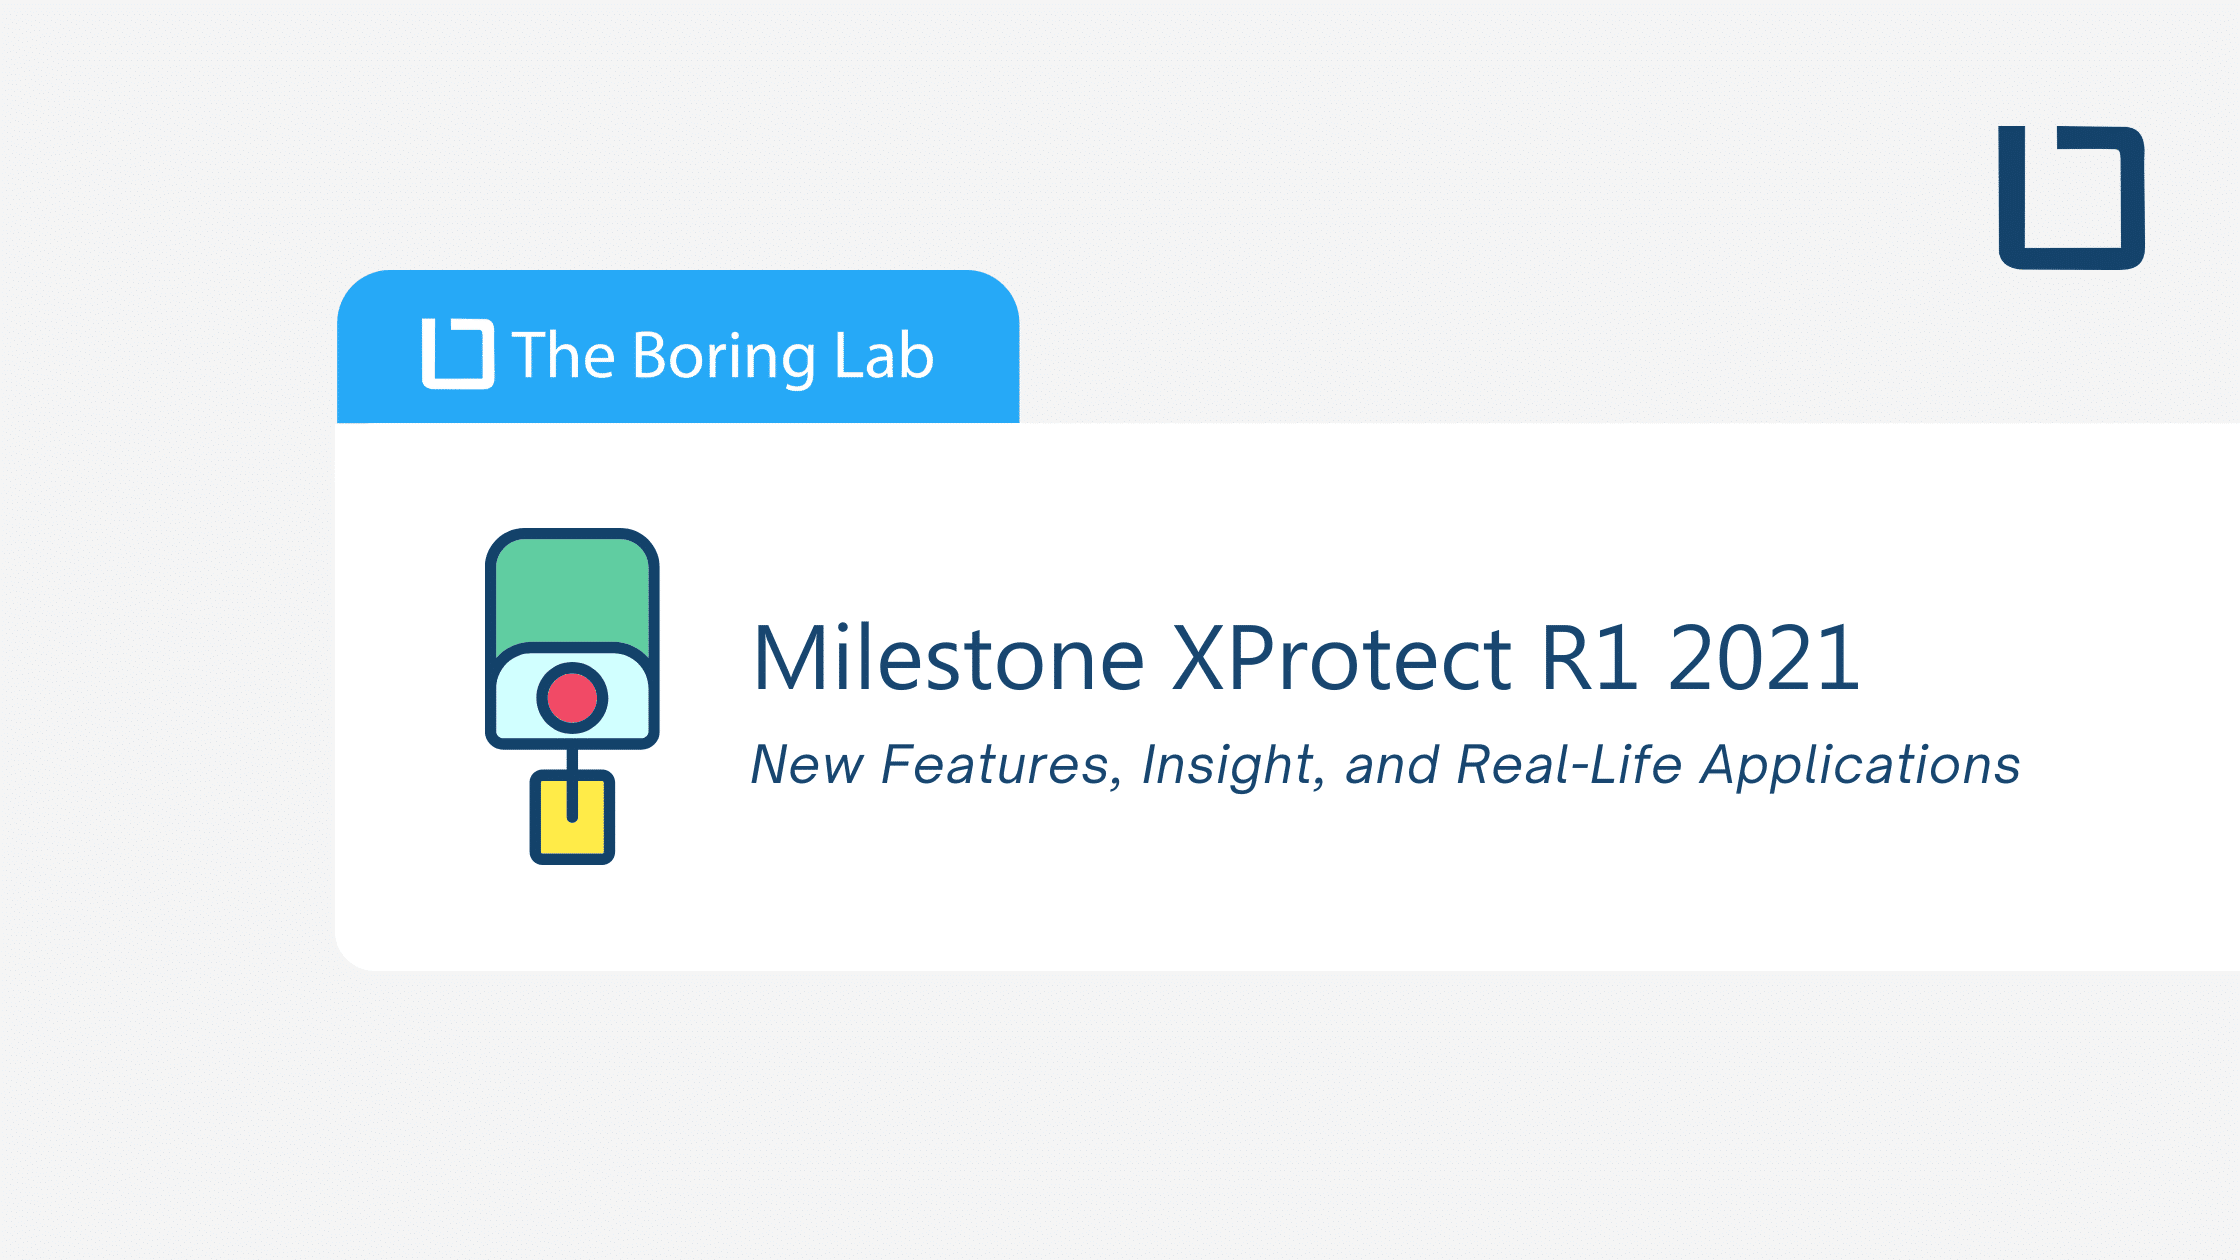 Milestone XProtect R1 2021: New Features, Insight, and Real-Life Applications